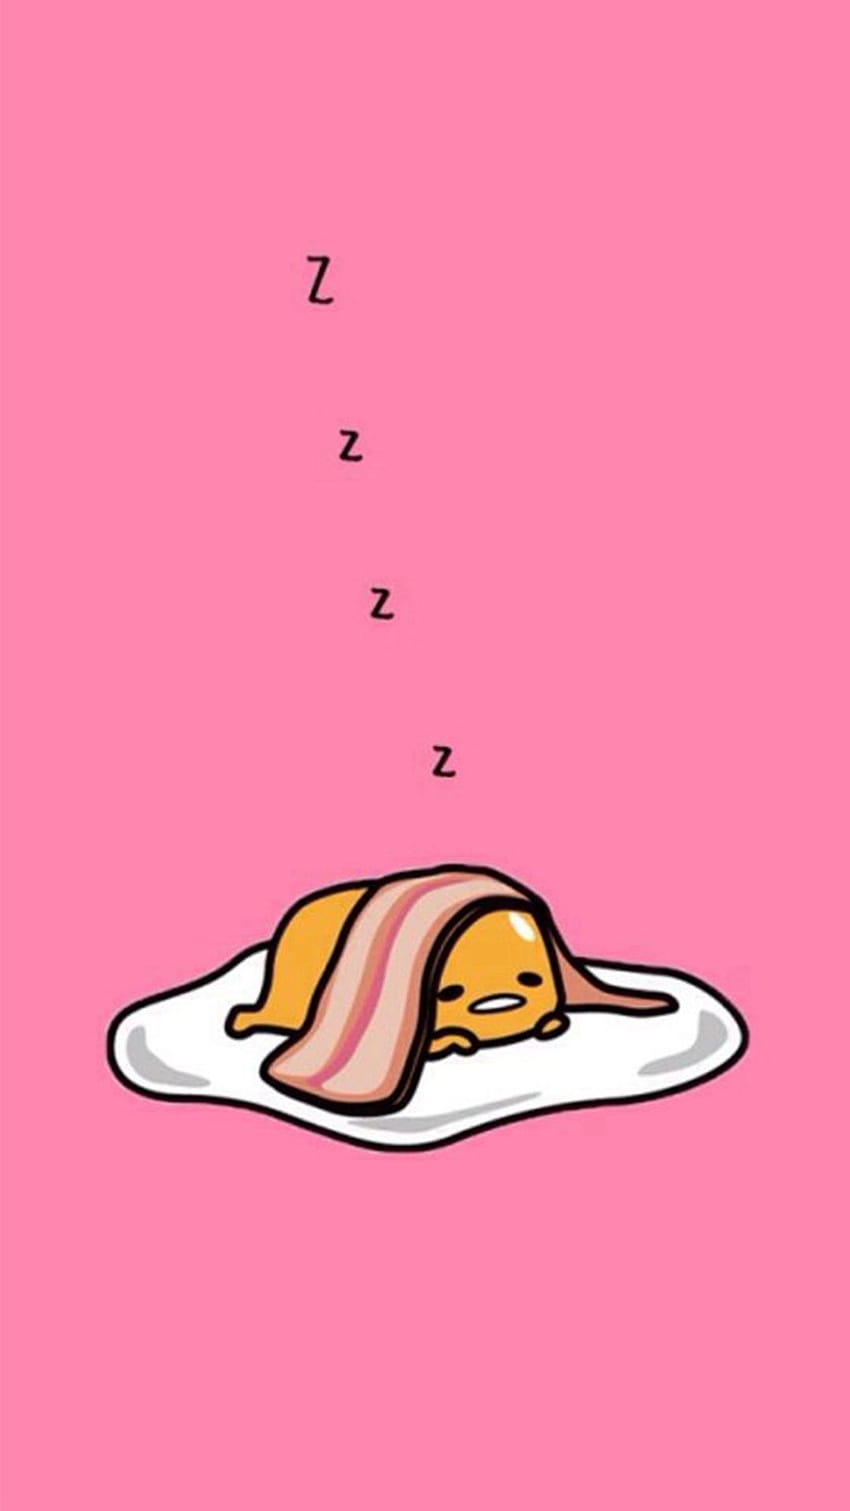 Bacon And Eggs Sleeping iPhone 8, cute eggs and bacon HD phone wallpaper